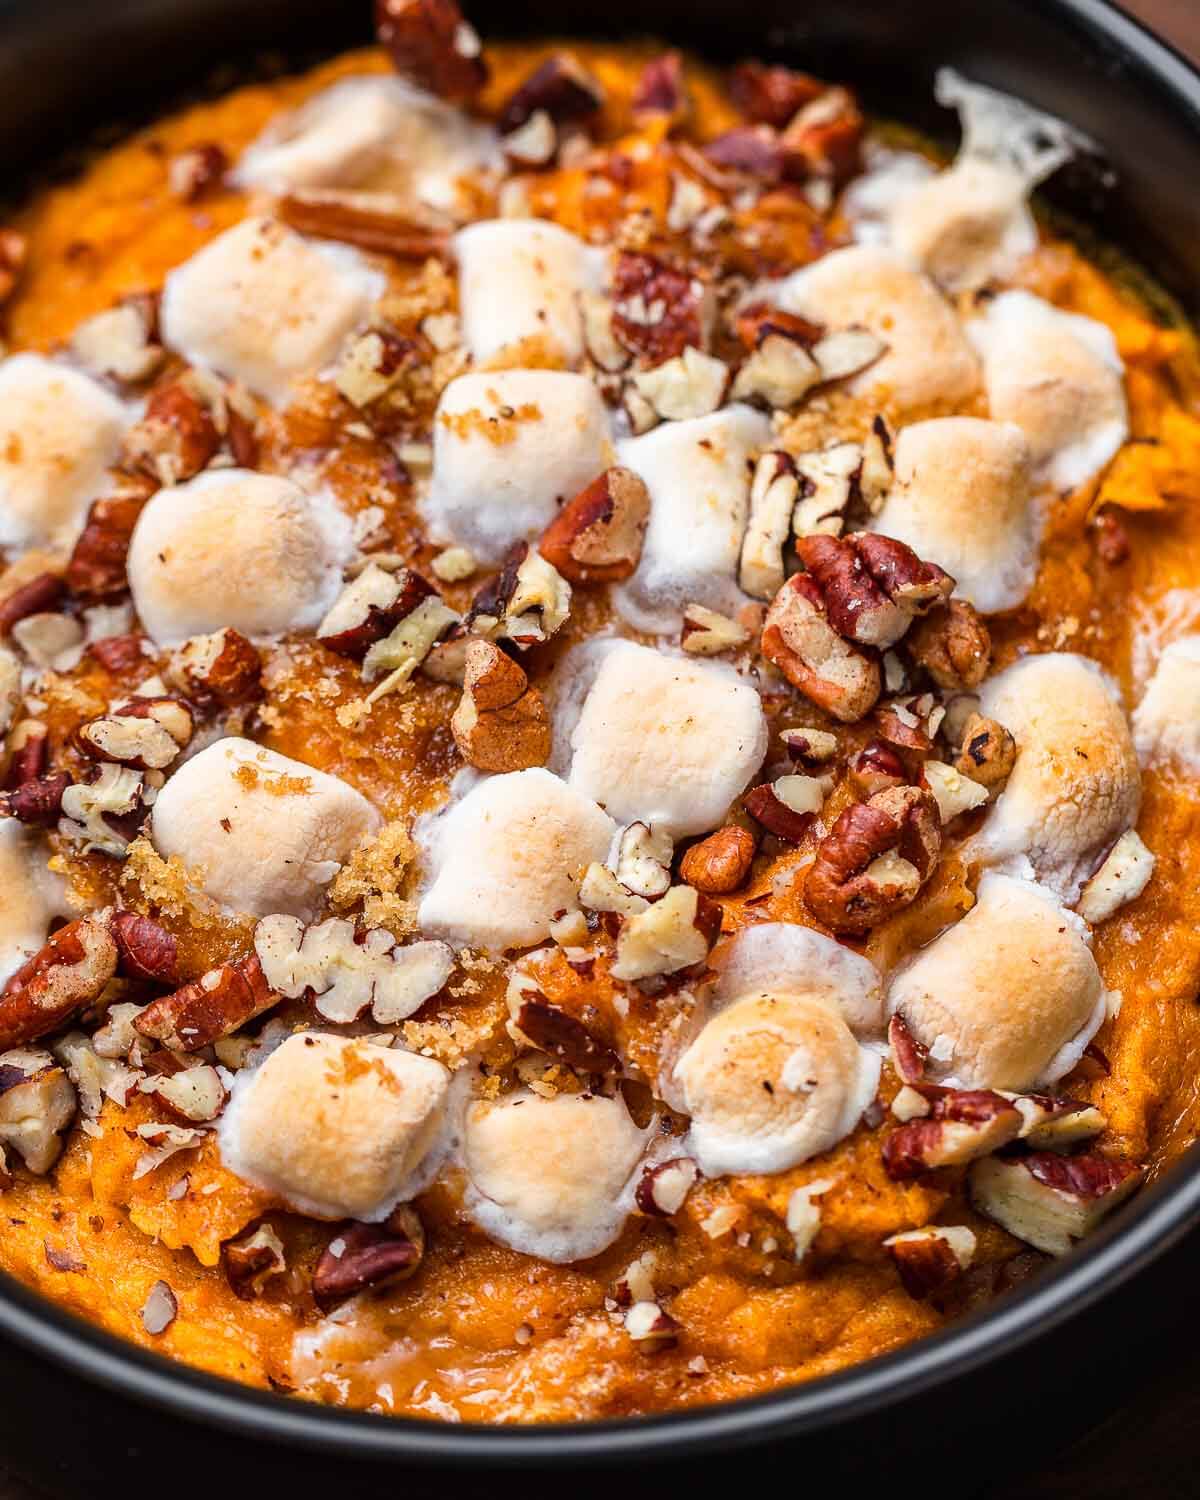 Sweet potato casserole with marshmallows and pecans in black bowl.